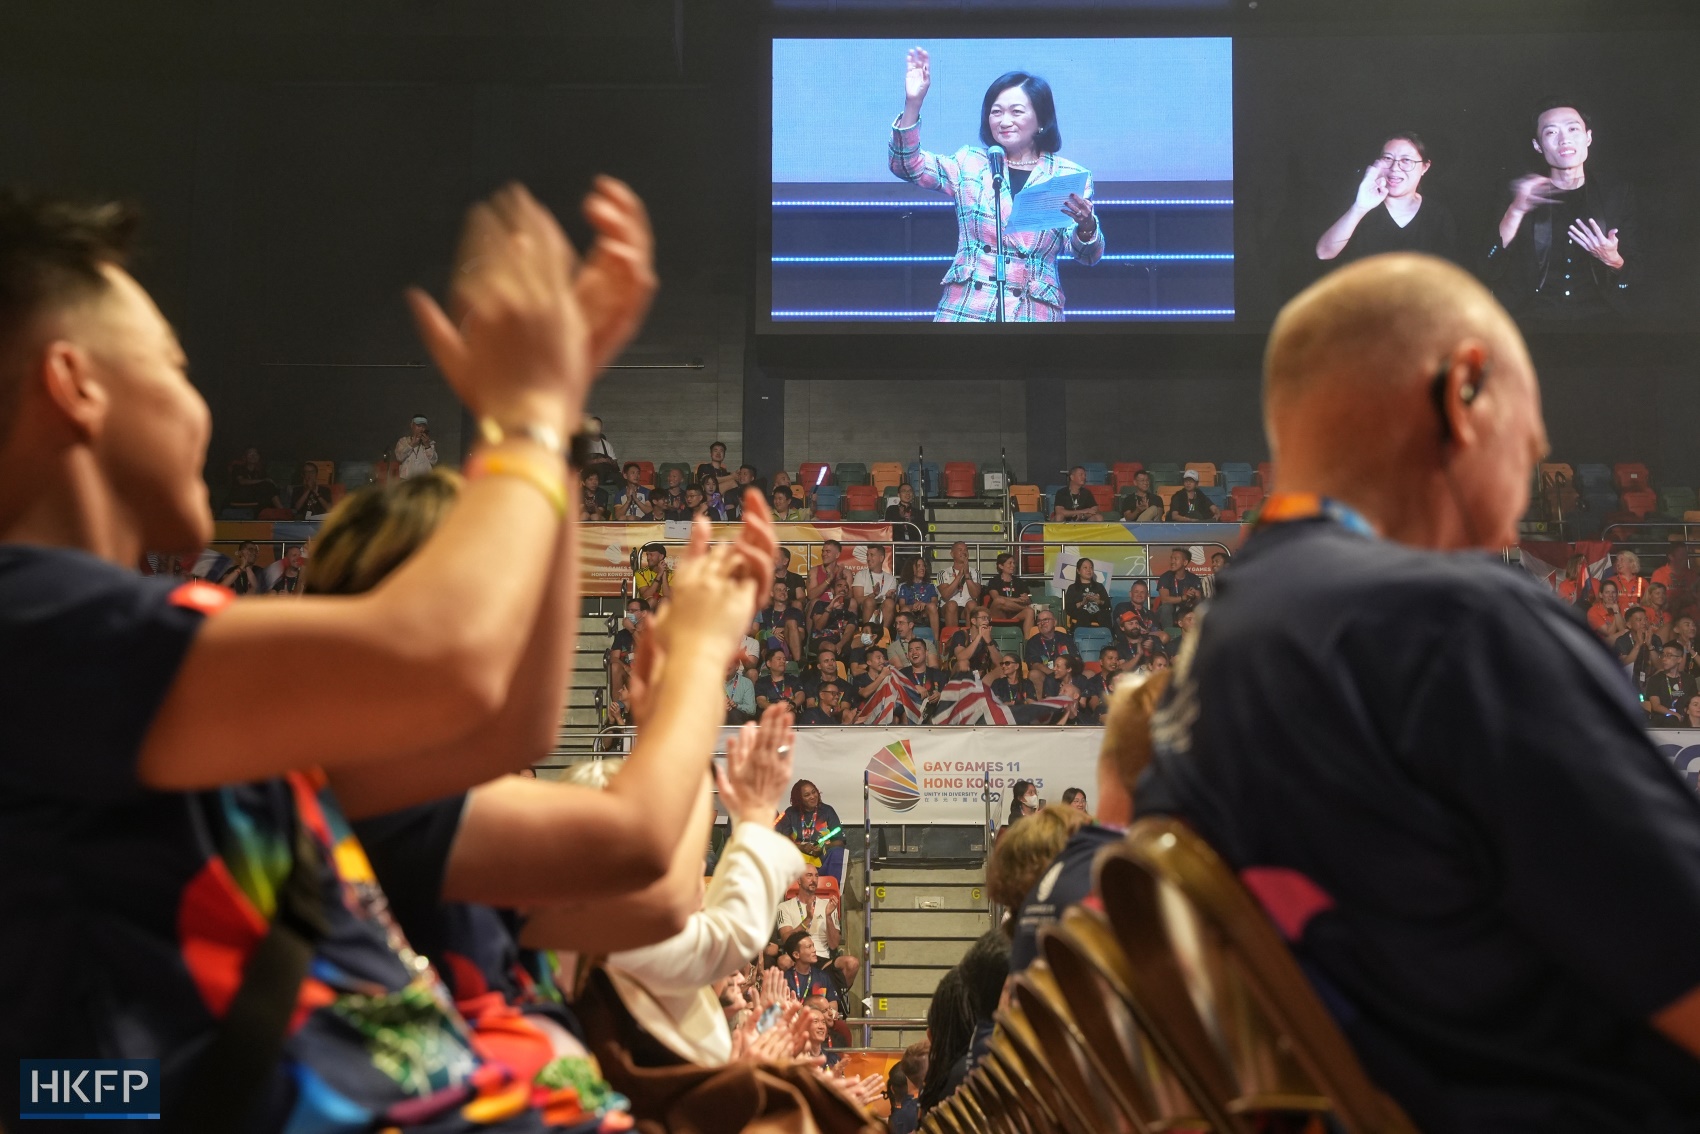 Lawmaker and Executive Council convener Regina Ip delivers a speech at Hong Kong's Gay Games, which officially opens on November 4, 2023. Photo: Kyle Lam/HKFP.